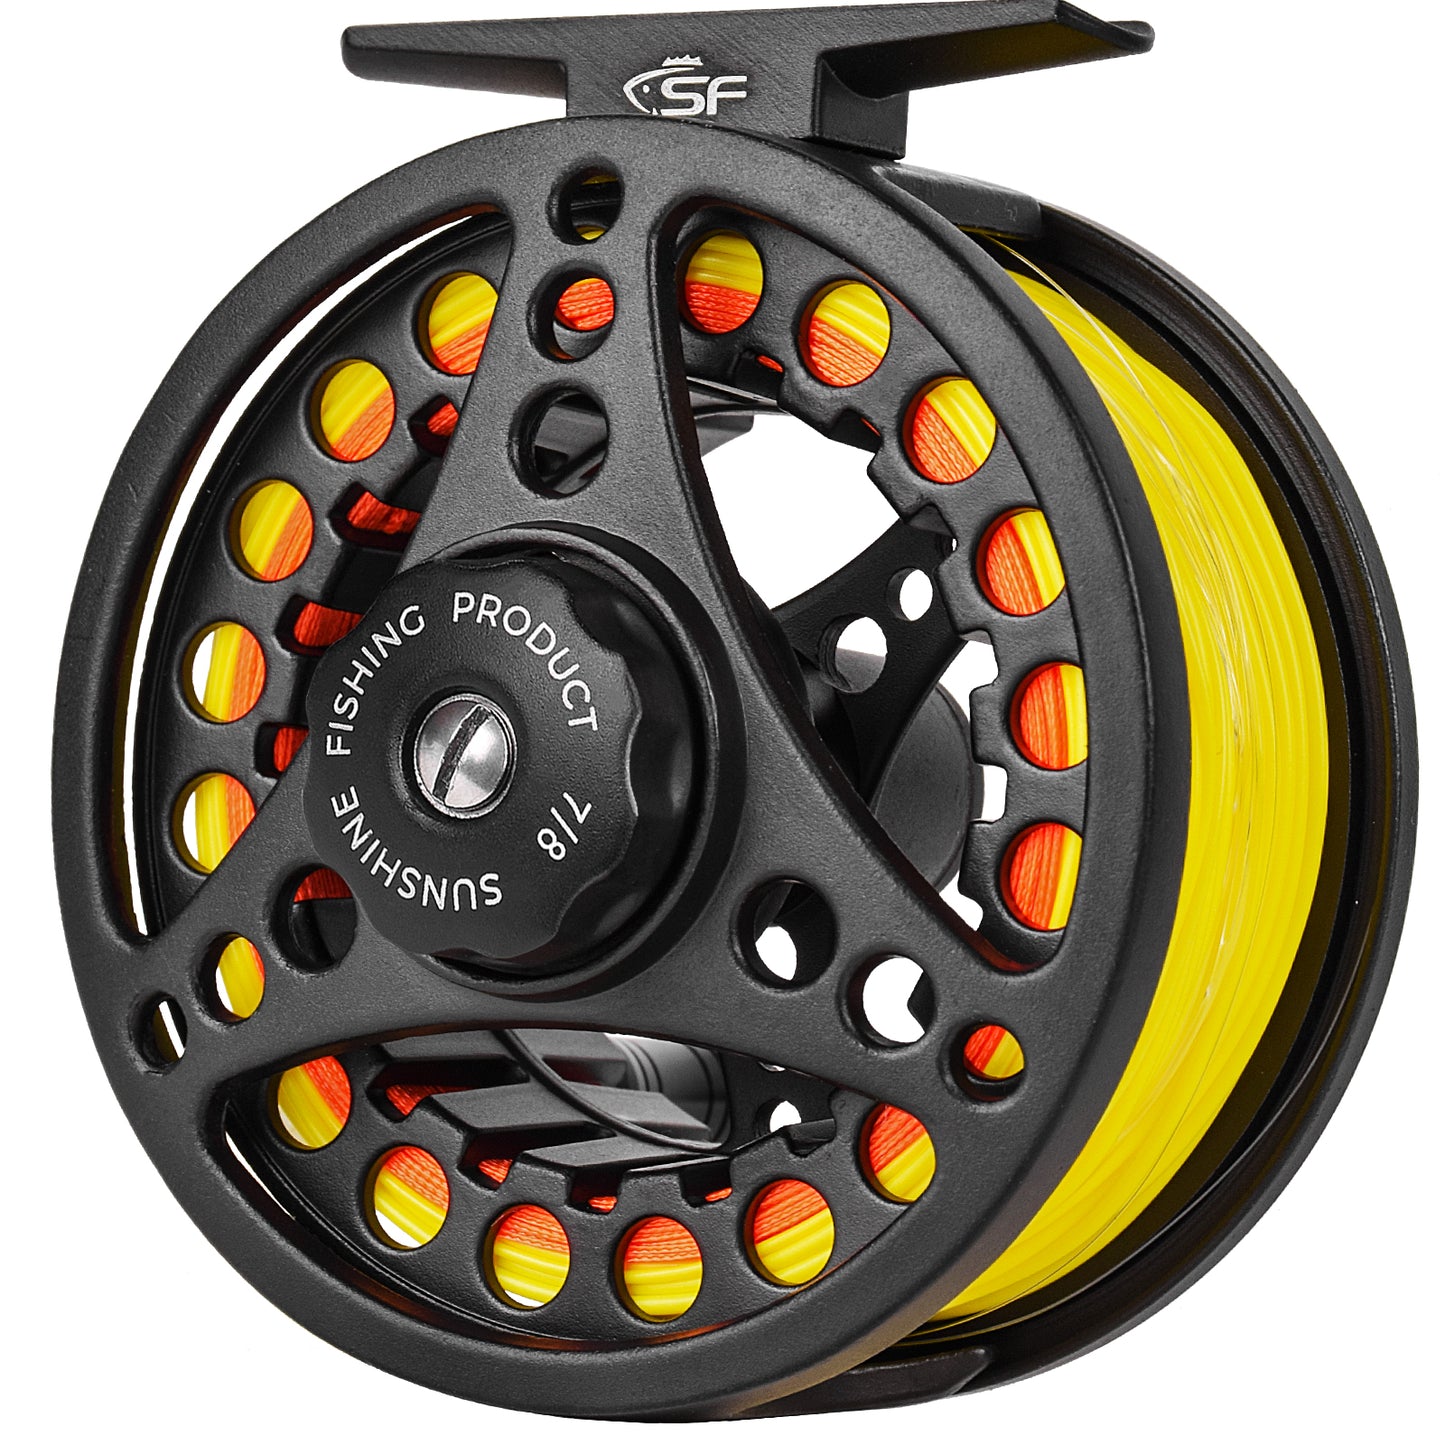 ANGLER DREAM Fly Fishing Reels Kit 7x WT Aluminum, 1 8 Reels, 231211.  Lightweight And Durable, Ideal For Flyfishing And Carp Fishing. From Zhi09,  $57.44